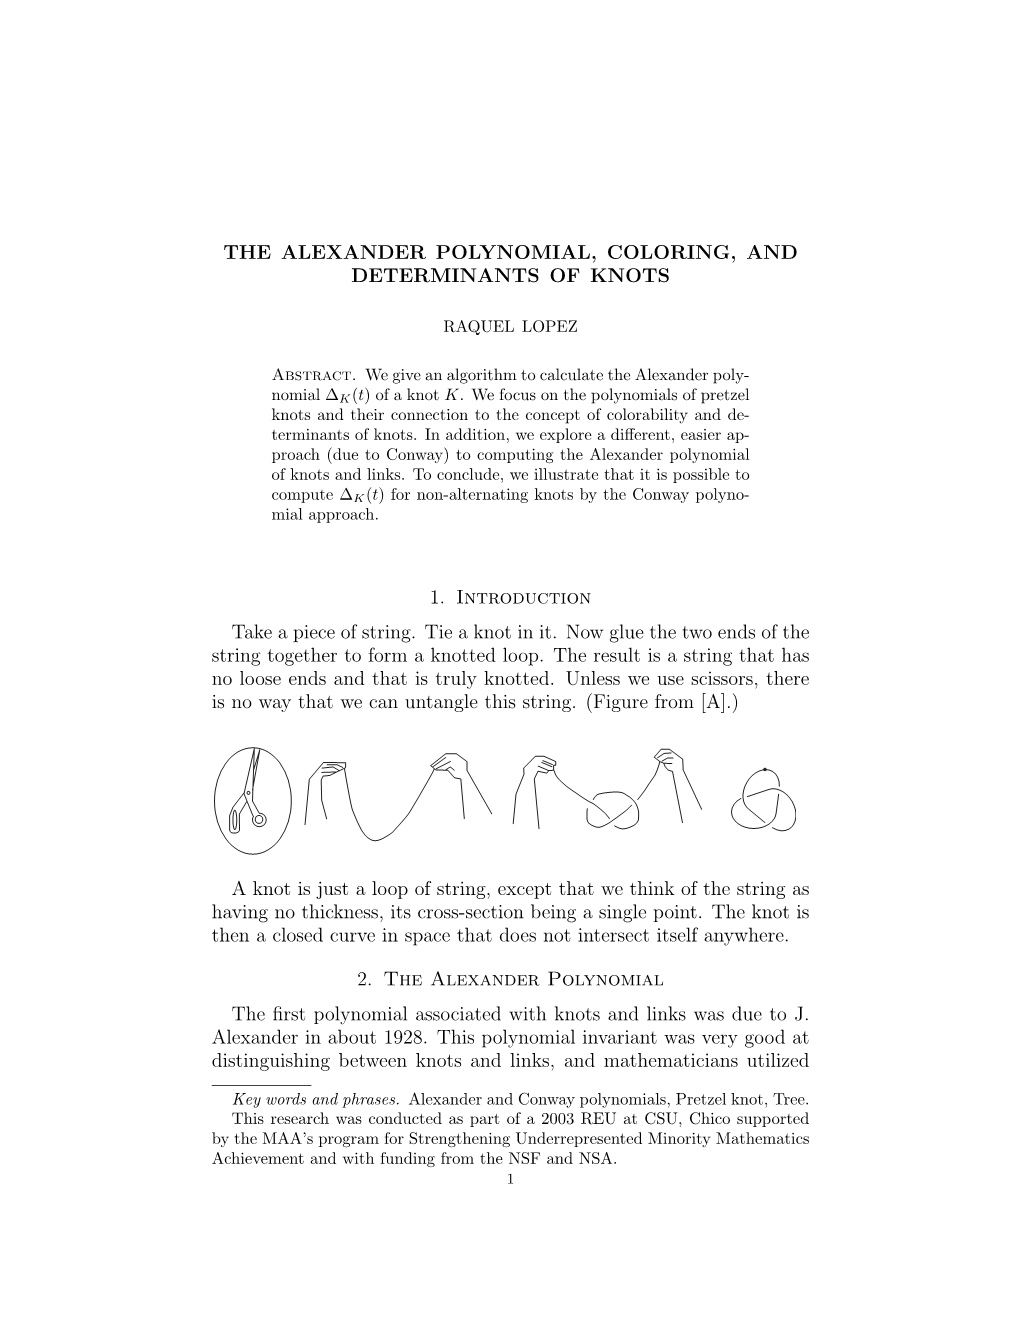 The Alexander Polynomial, Coloring, and Determinants of Knots